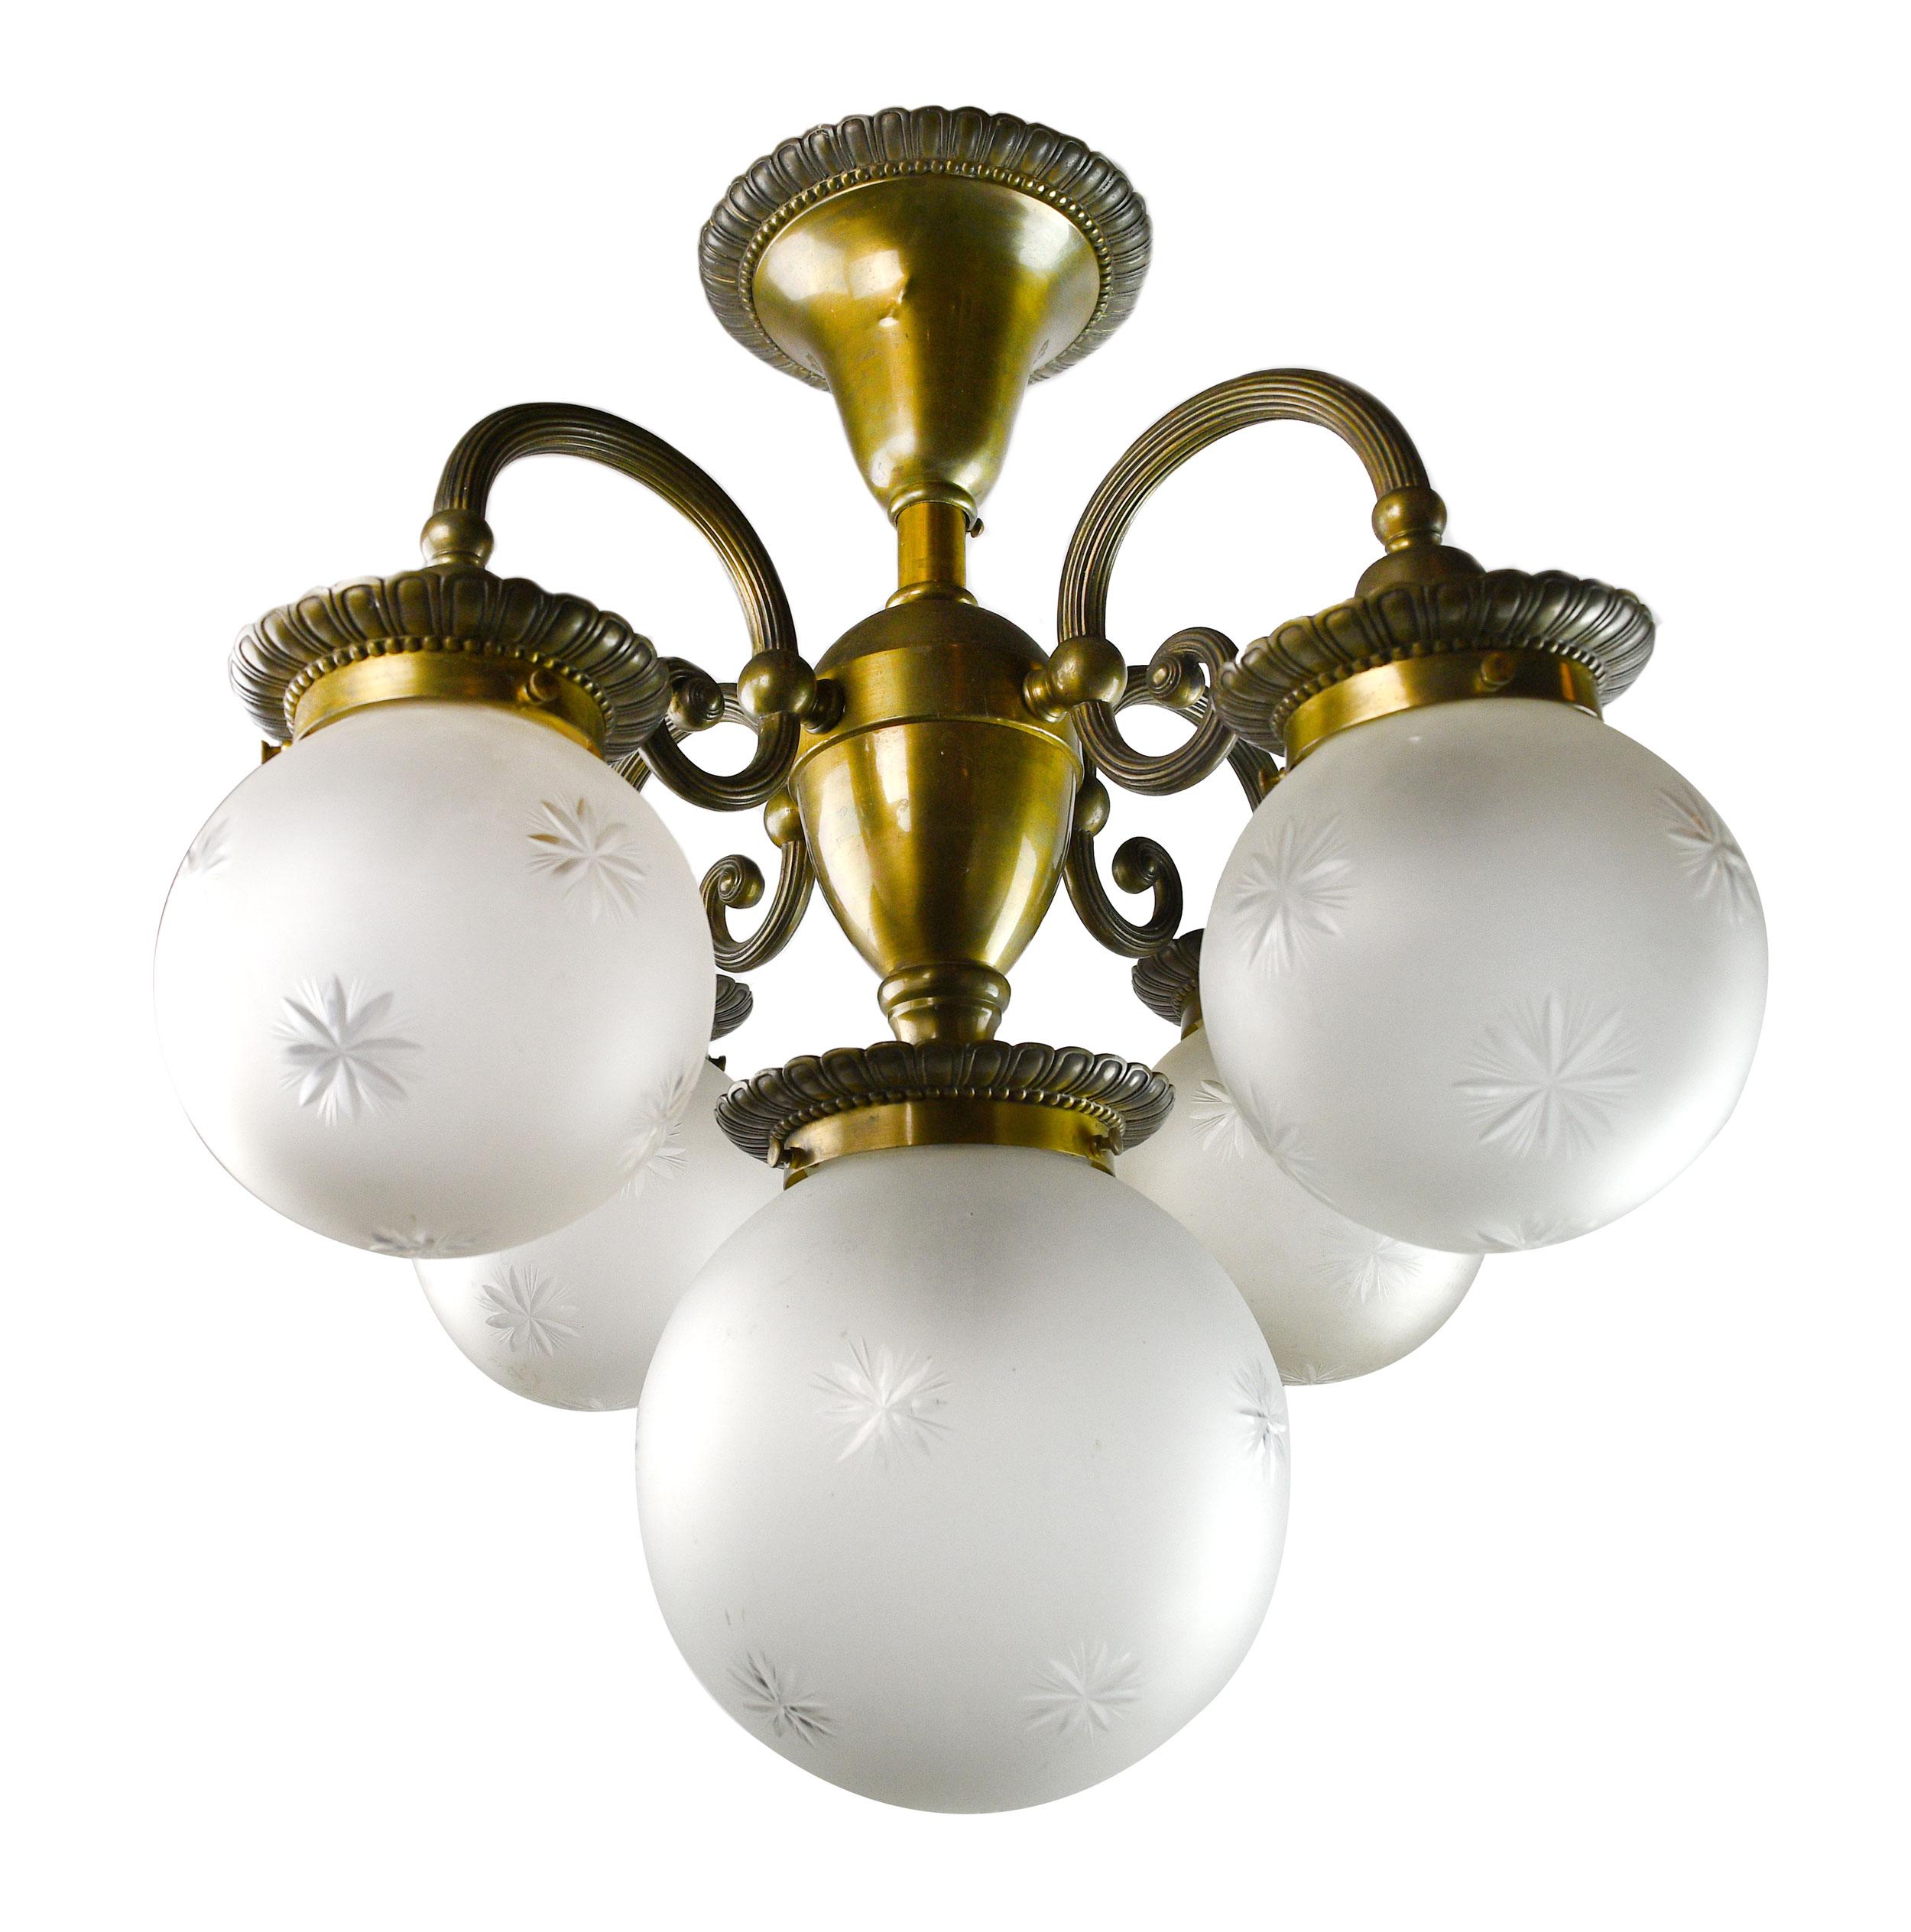 This finely crafted 5-light chandelier is made of cast bronze and features a large center globe surrounded 4 slightly smaller globes, each is hand cut.
There are two globe designs available, a floral design and a starburst design. 

Chose you glass